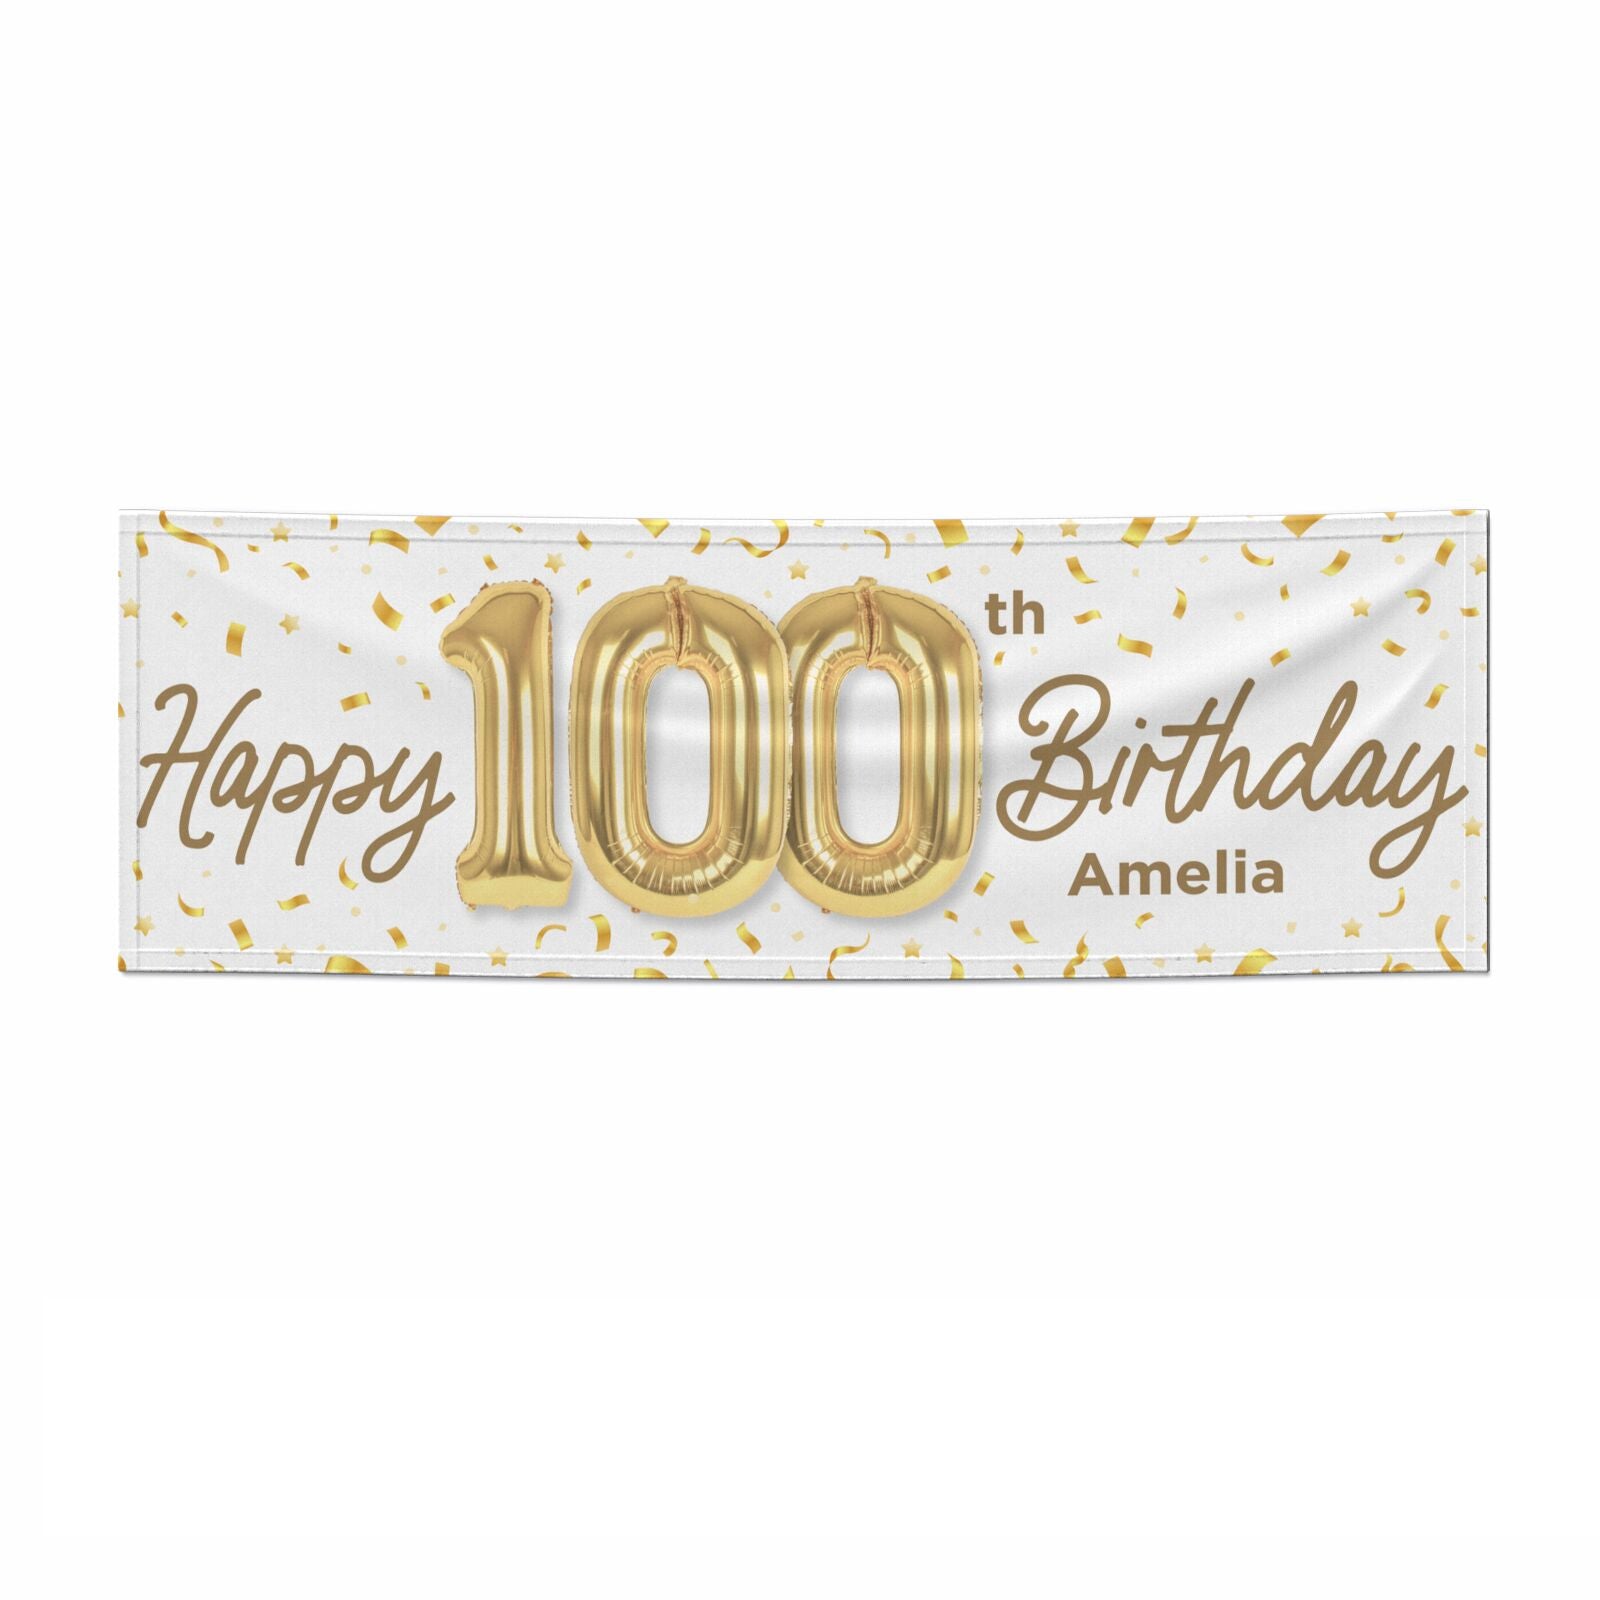 Personalised 100th Birthday 6x2 Paper Banner